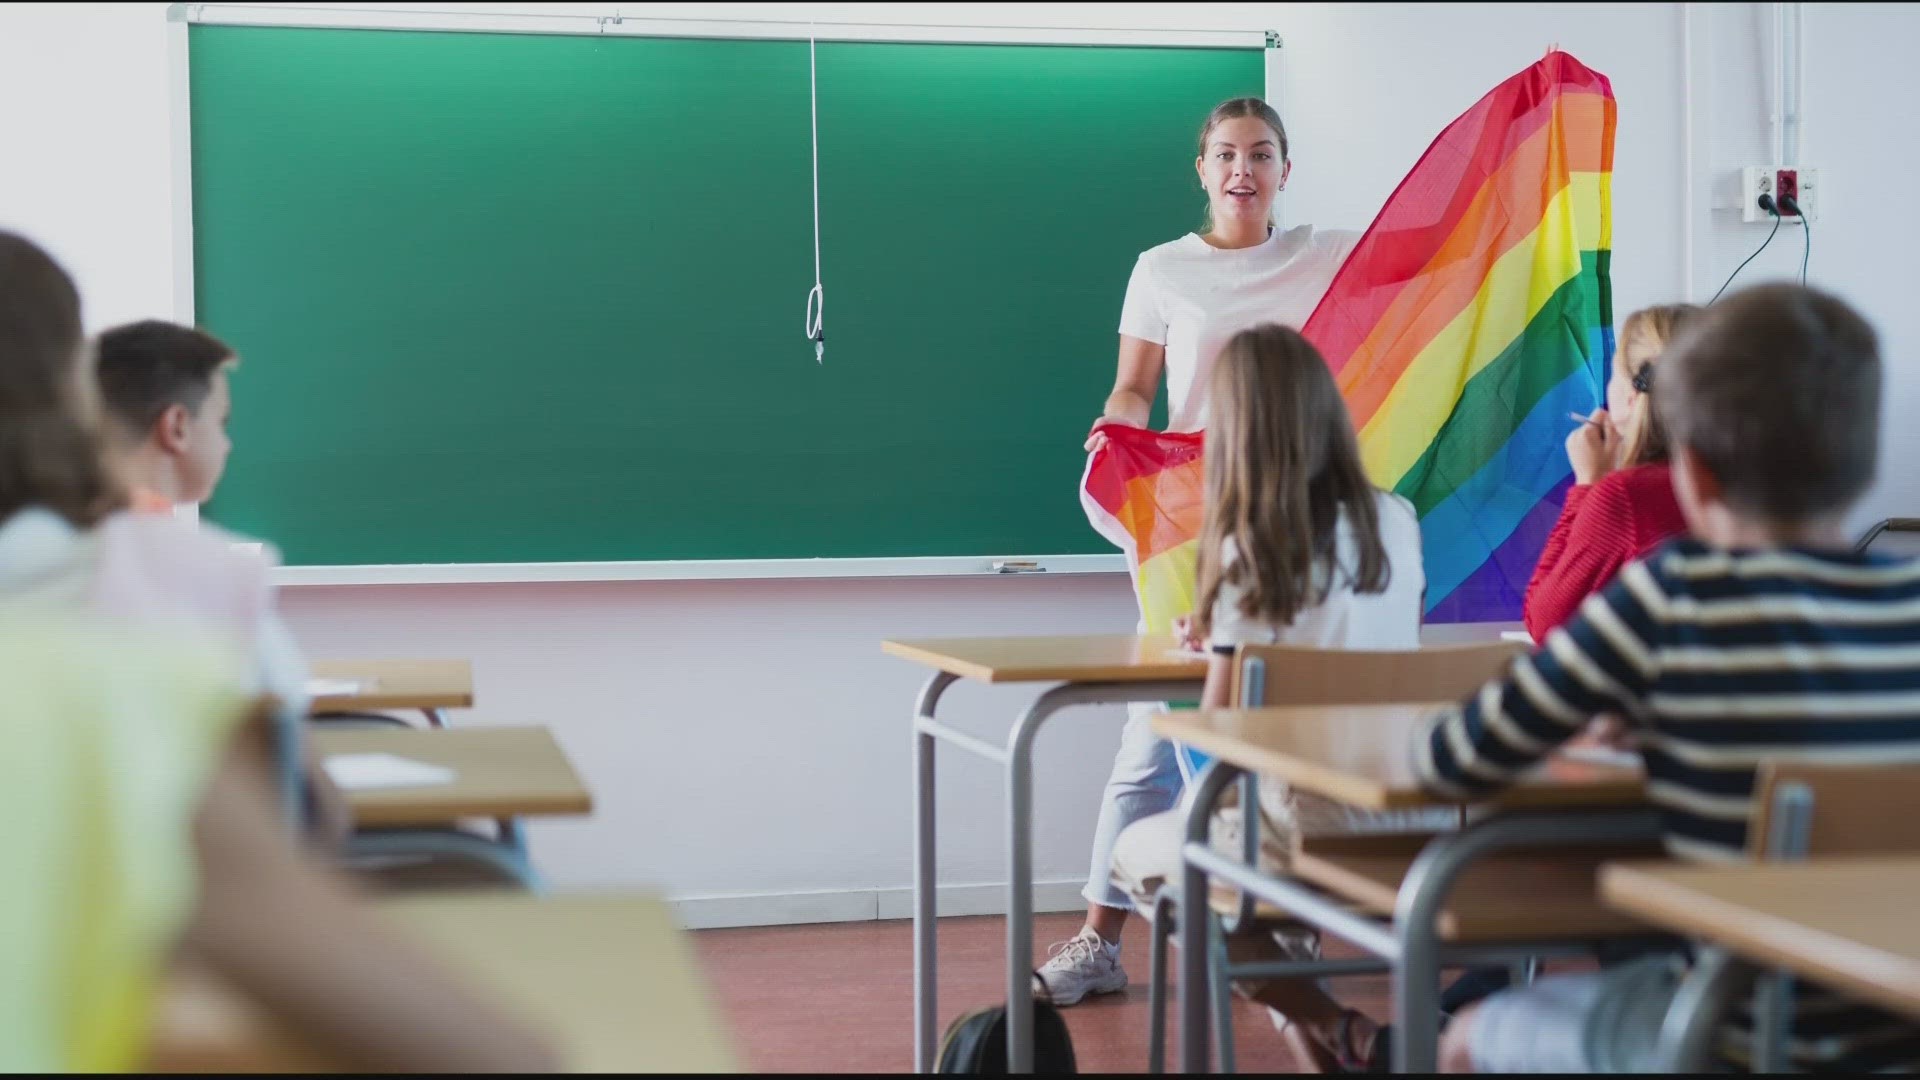 A bill just signed into law in Washington will require all schools to include LGBTQ history in their lessons.